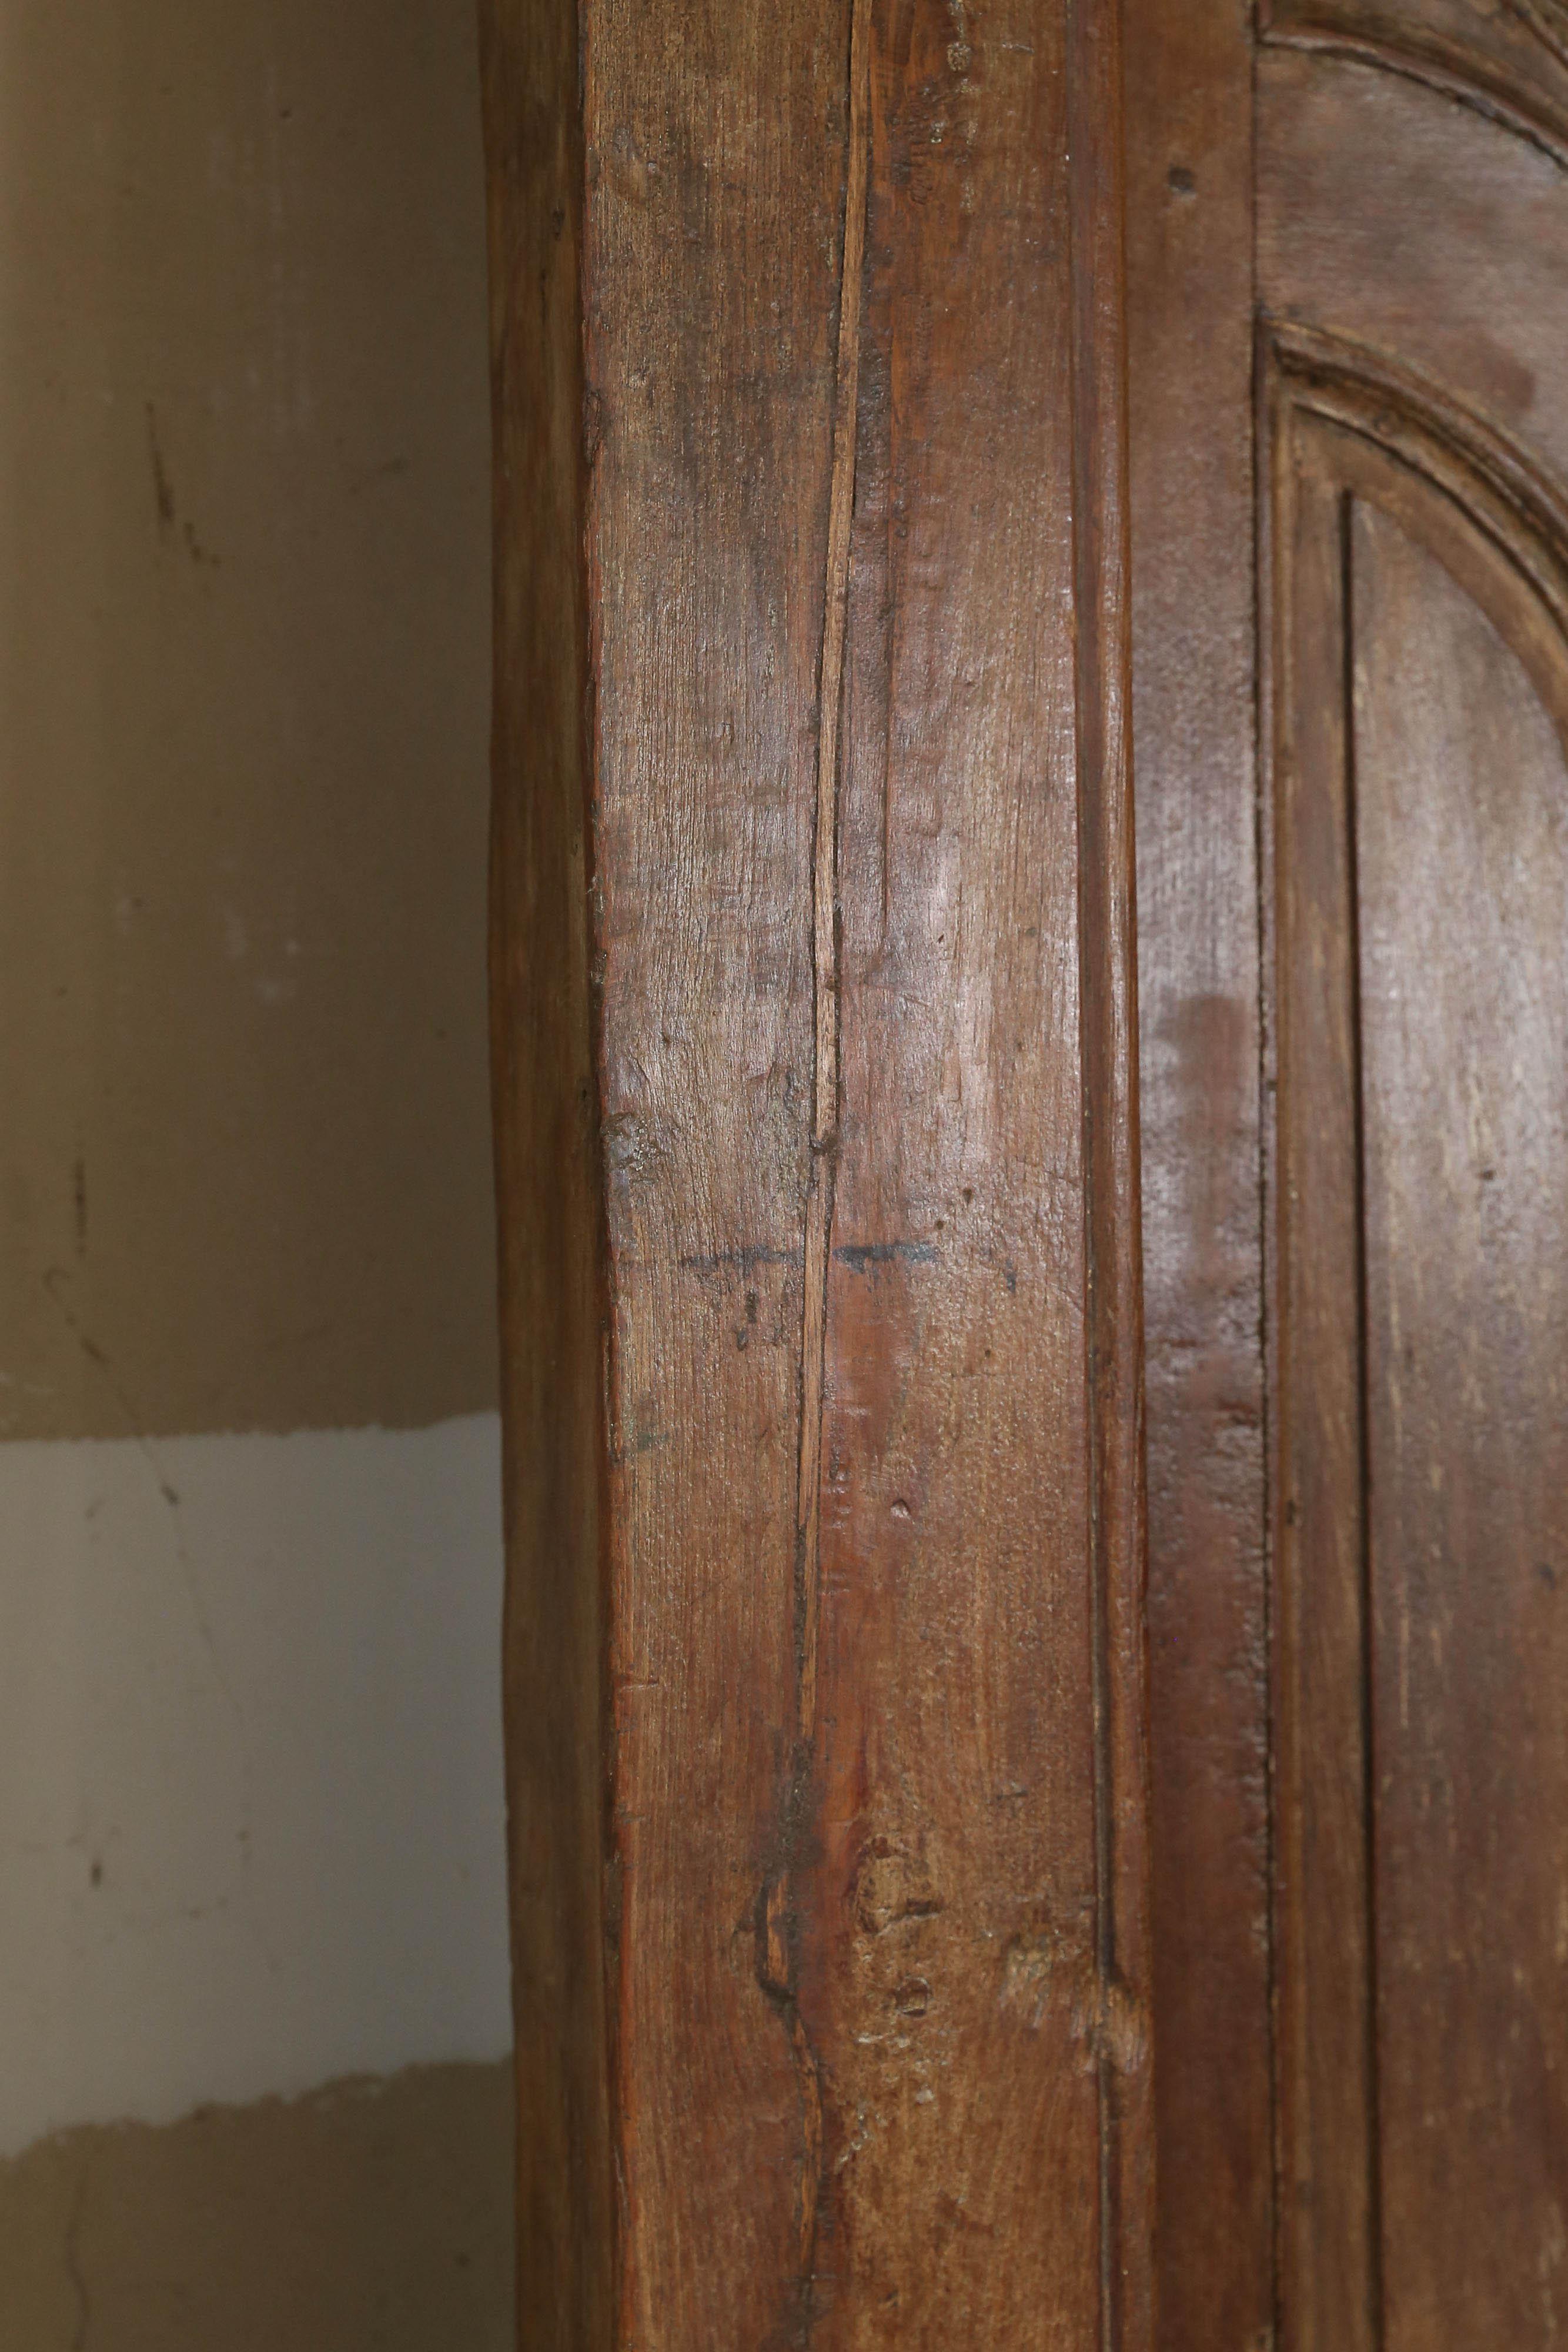 Anglo Raj Grand Mid-19th Century Solid Teak Wood Entry Door from a Colonial Mansion For Sale